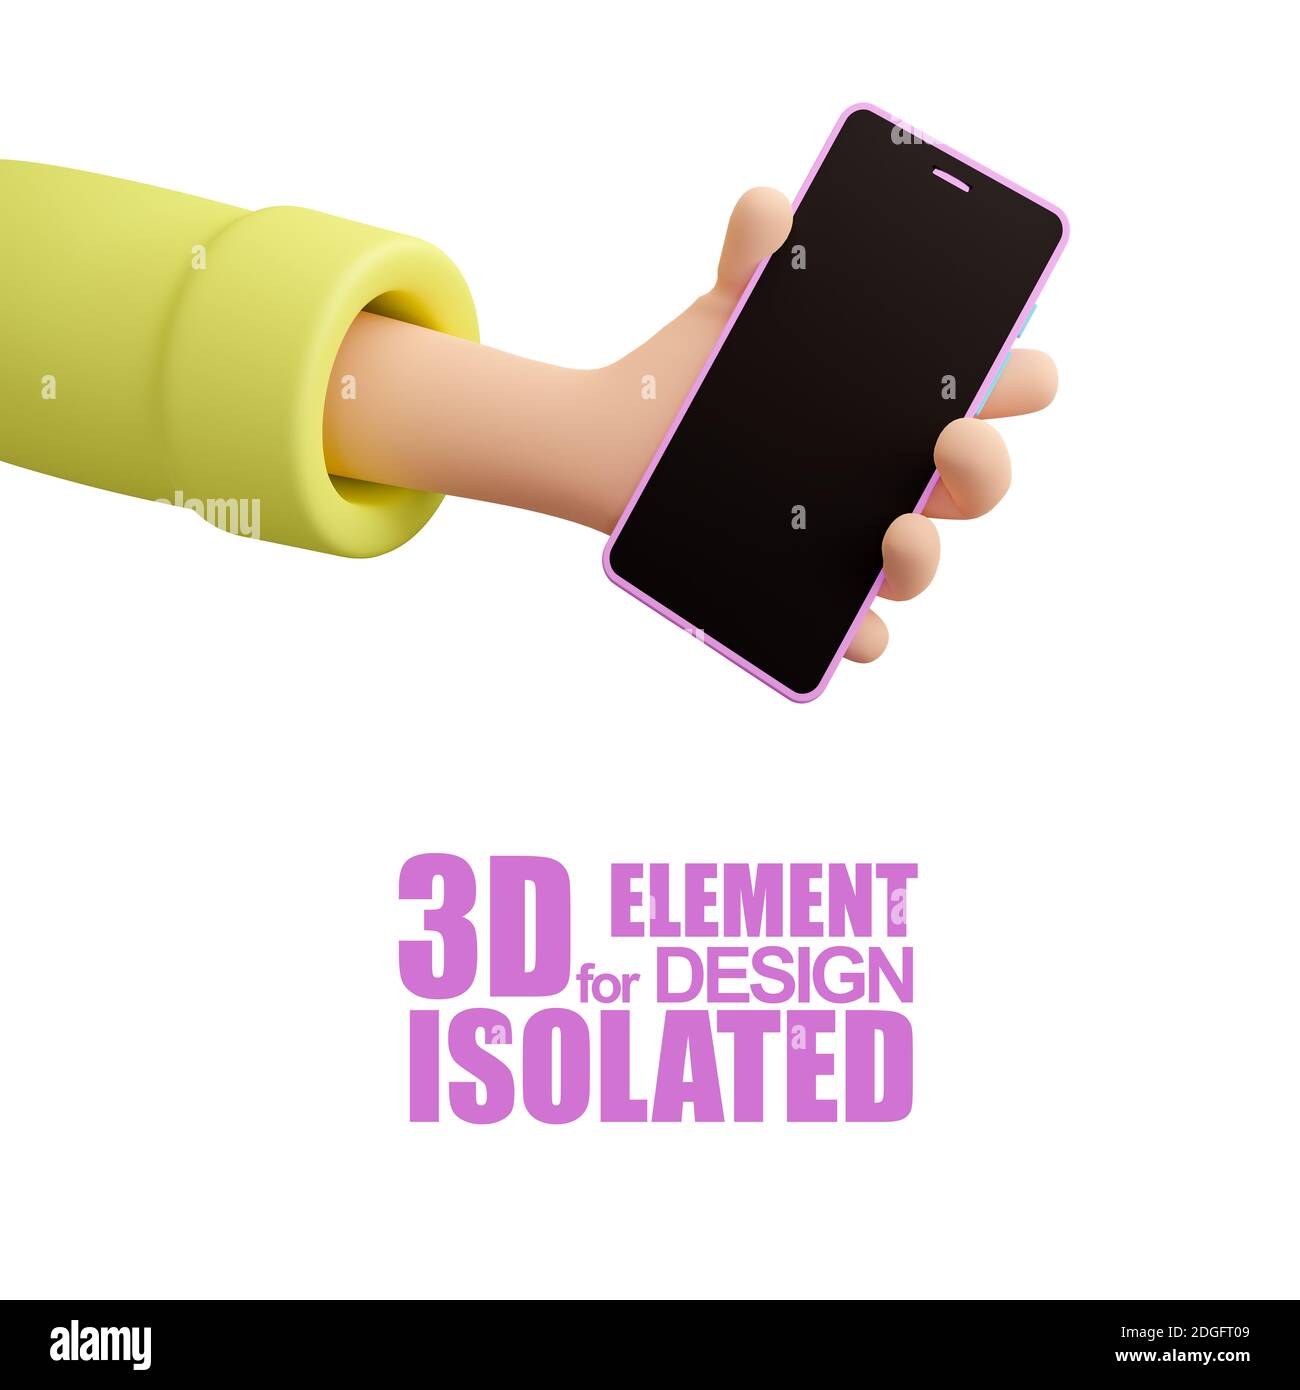 A Cartoon 3d Hand Holding A Mobile Phone 3d Illustration Isolated On White Background Render Element For Banner Design Concept Of Communications Stock Photo Alamy